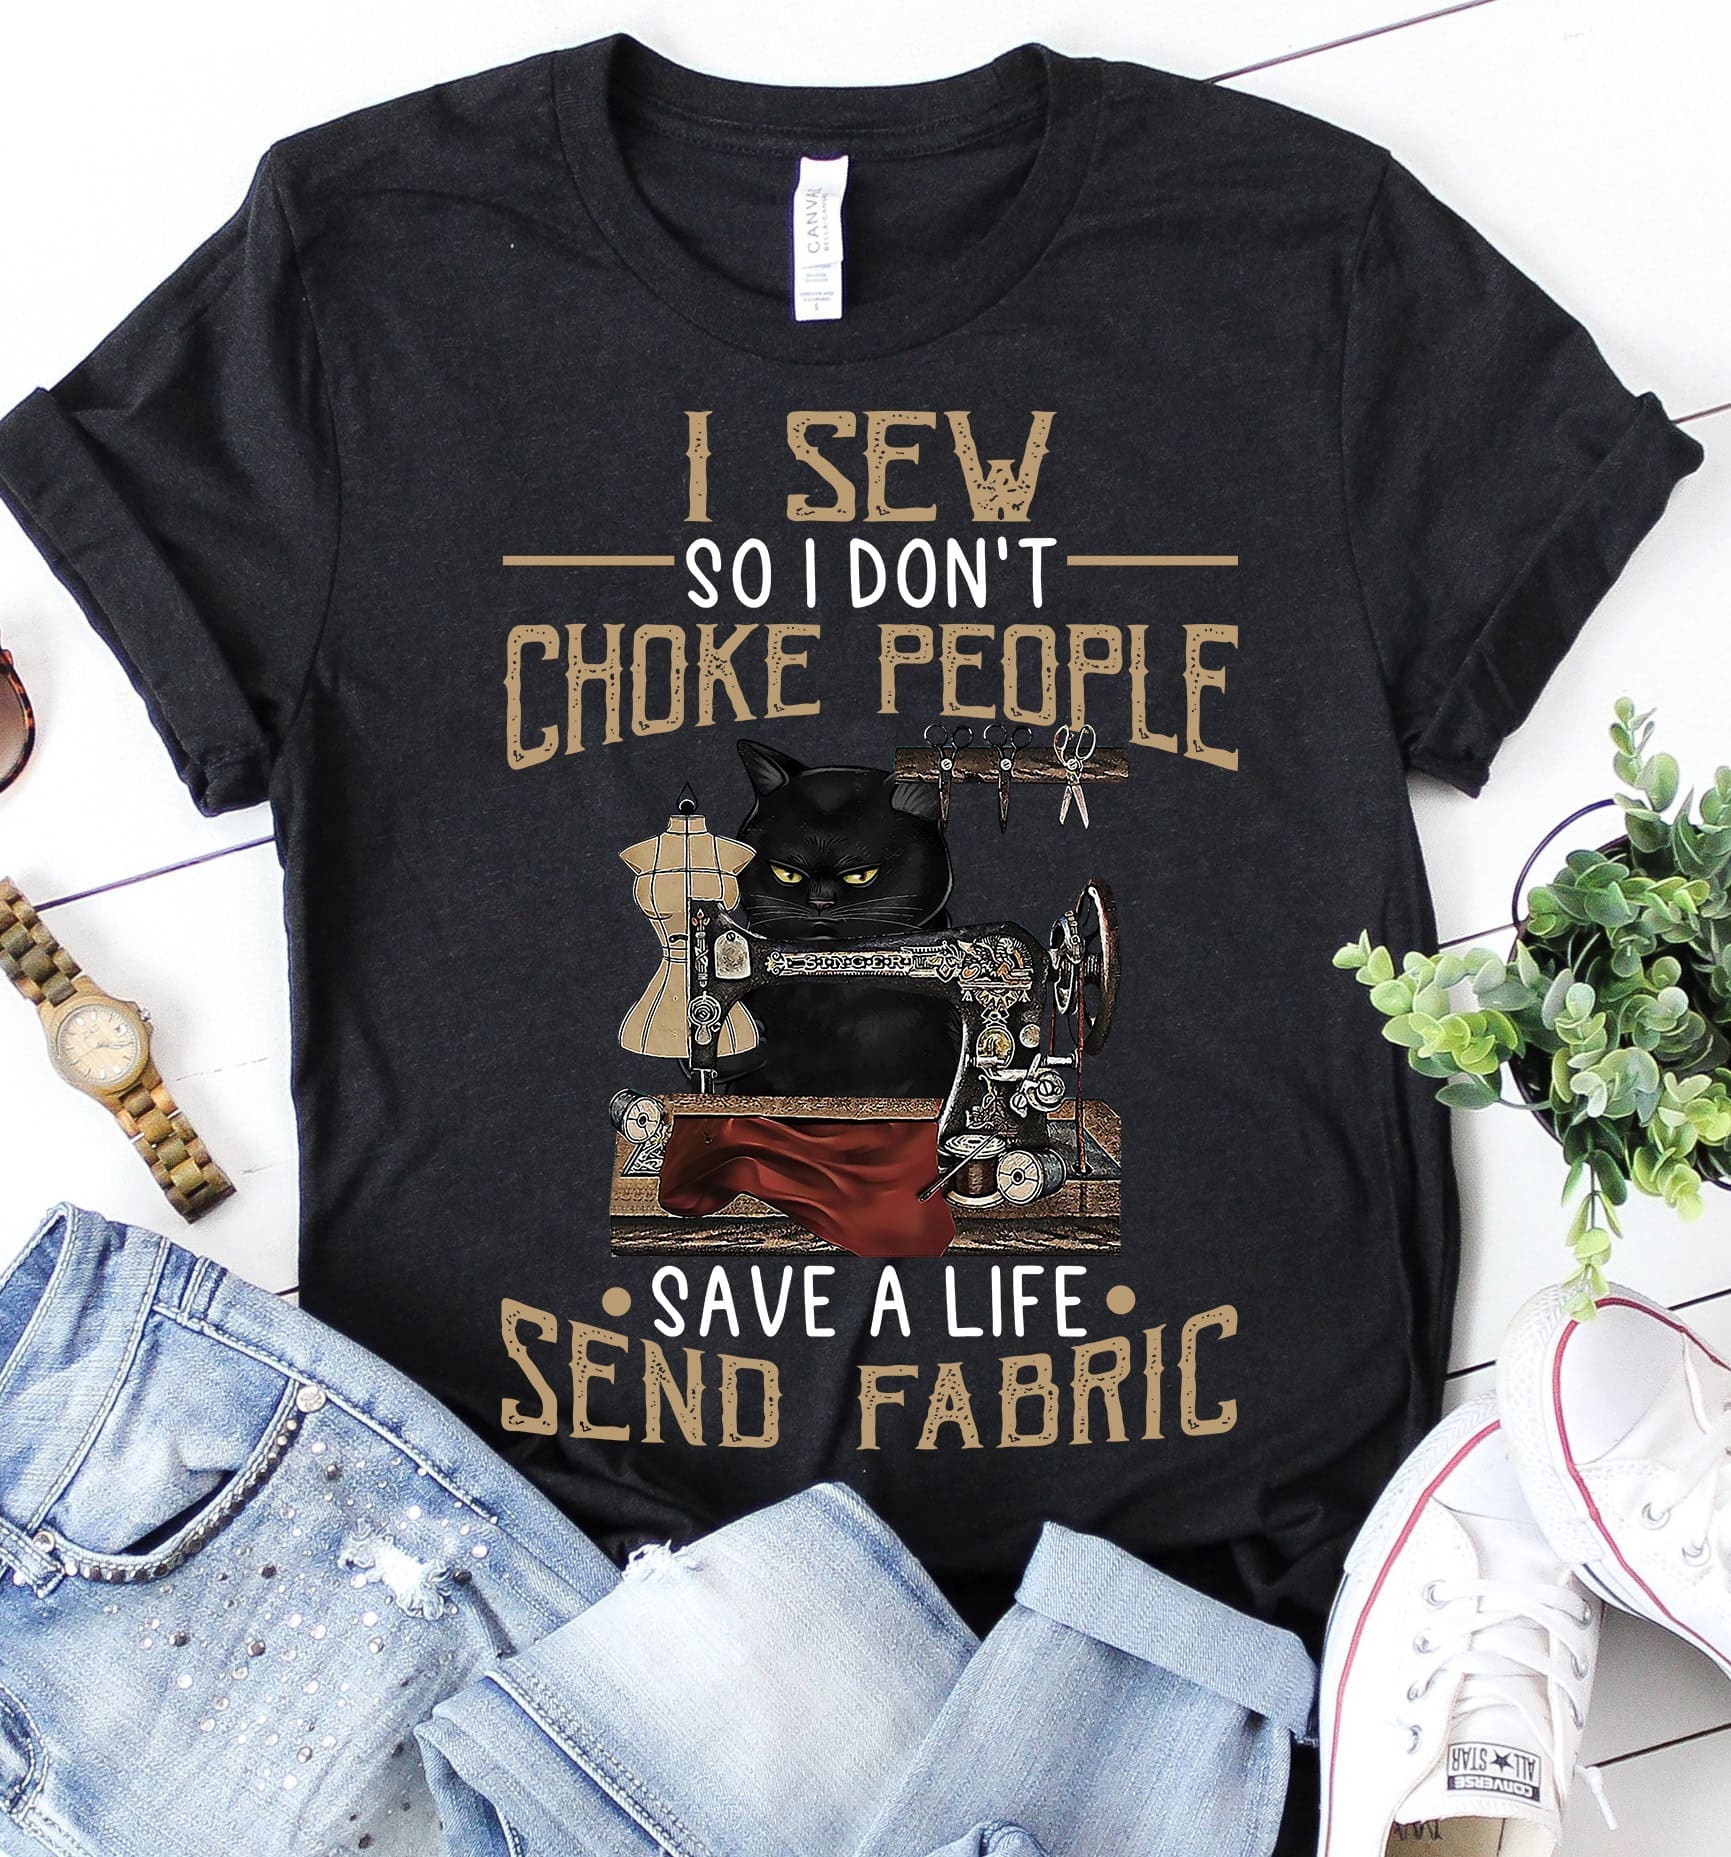 I sew so I don't choke people, save a life send fabric - Black cat sewing, sewing machine graphic T-shirt